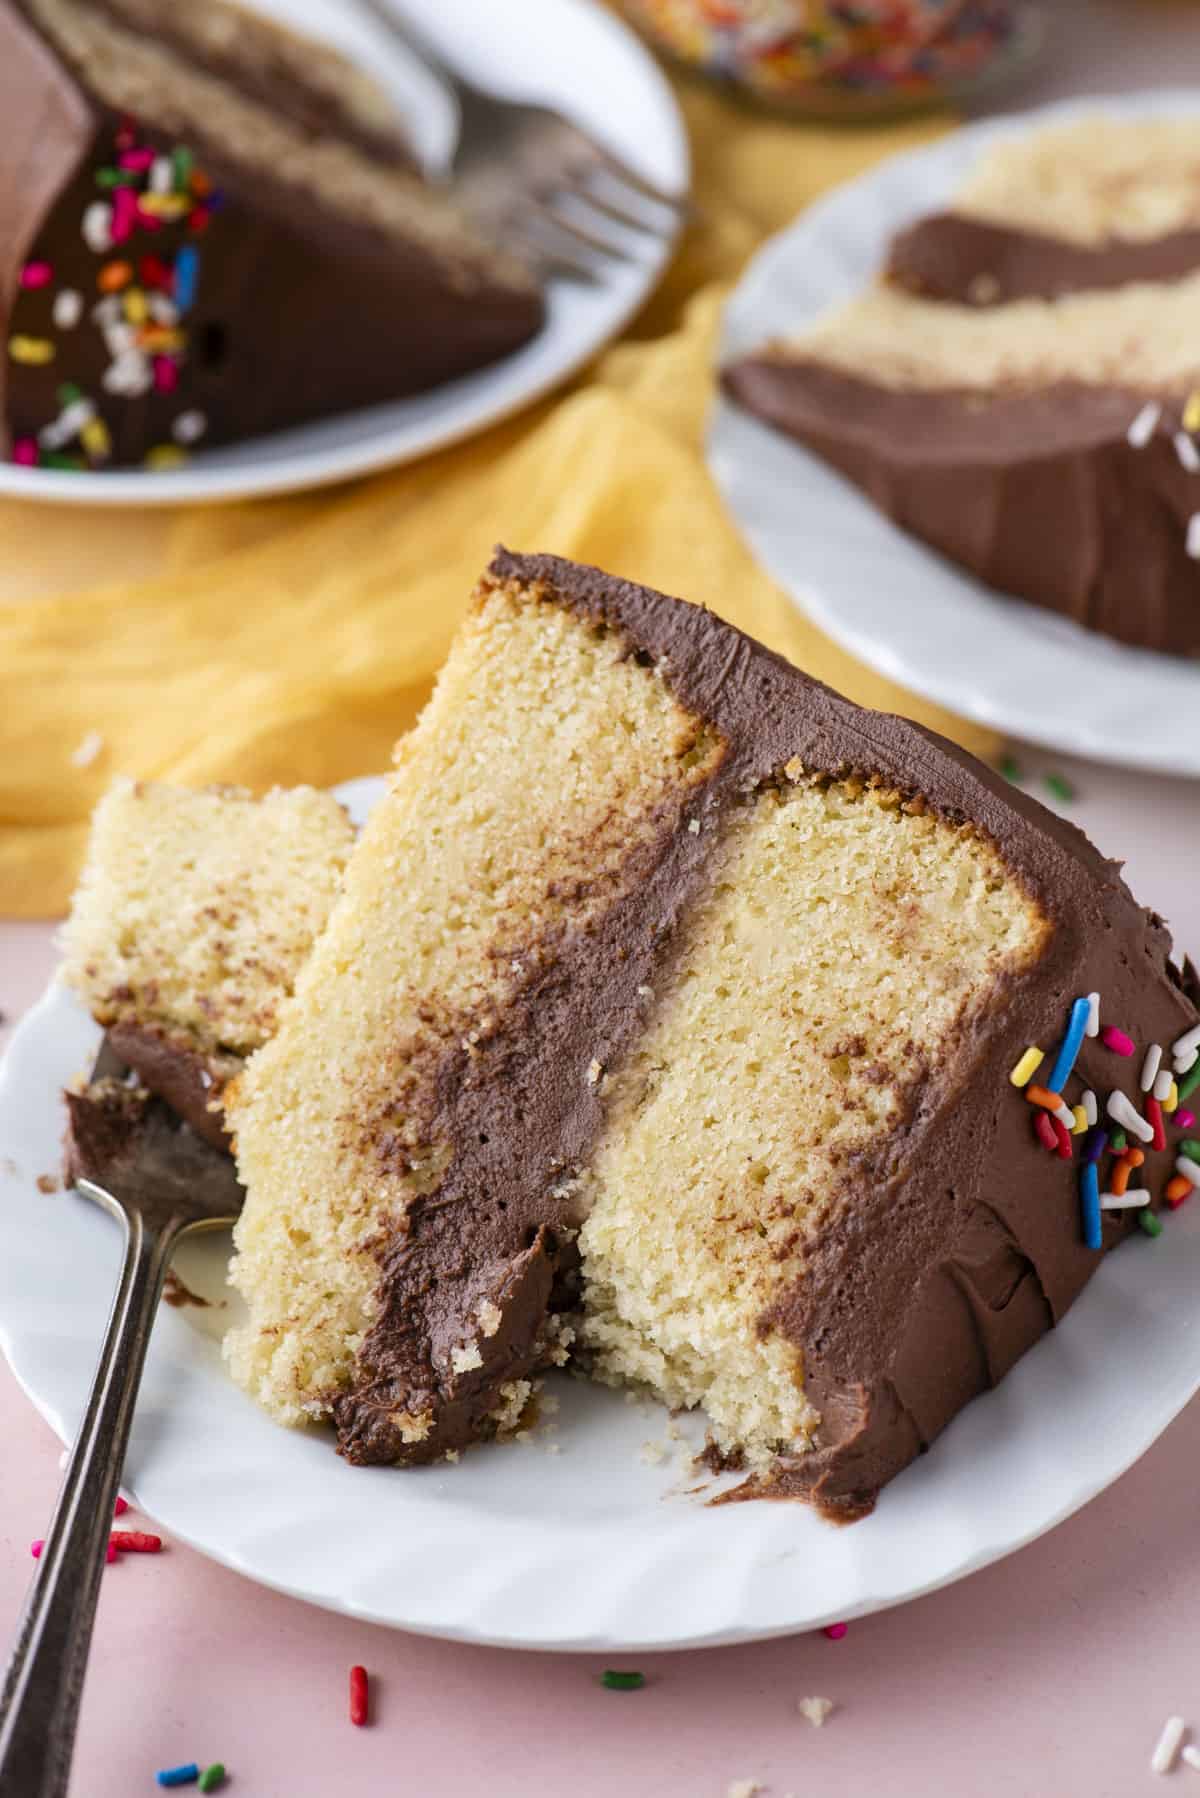 a slice of two layer yellow cake with chocolate frosting on a white plate, with a fork leaning on it that has one bite of cake on it, sitting on a light pink surface with more slices on plates in the background and sprinkles scattered around